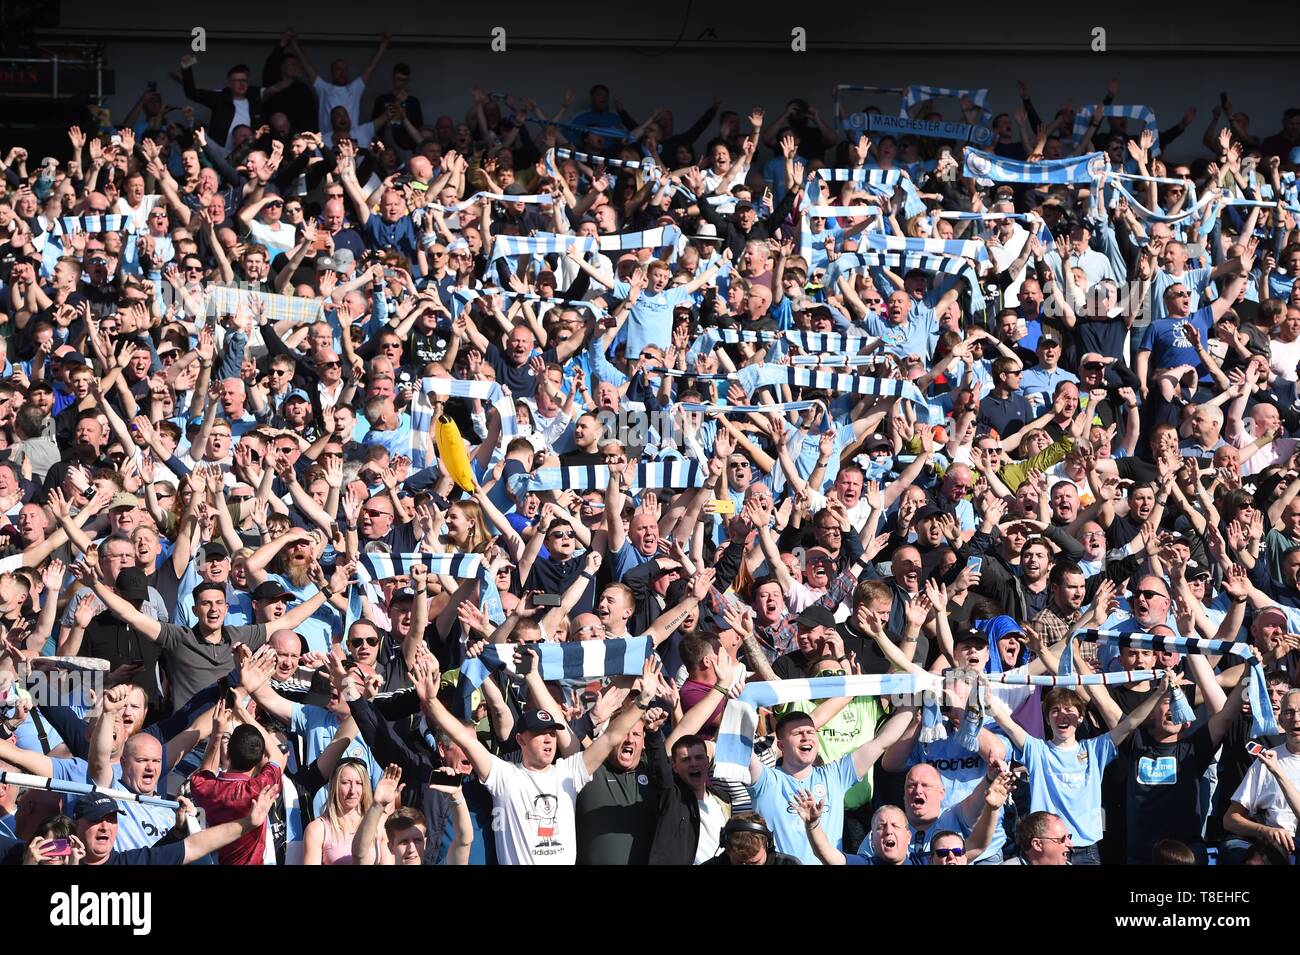 City fans celebrate winning the title during the Premier League match between Brighton & Hove Albion and Manchester City  at the American Express Community Stadium 12 May 2019 Photo Simon Dack/Telephoto Images Editorial use only. No merchandising. For Football images FA and Premier League restrictions apply inc. no internet/mobile usage without FAPL license - for details contact Football Dataco Stock Photo